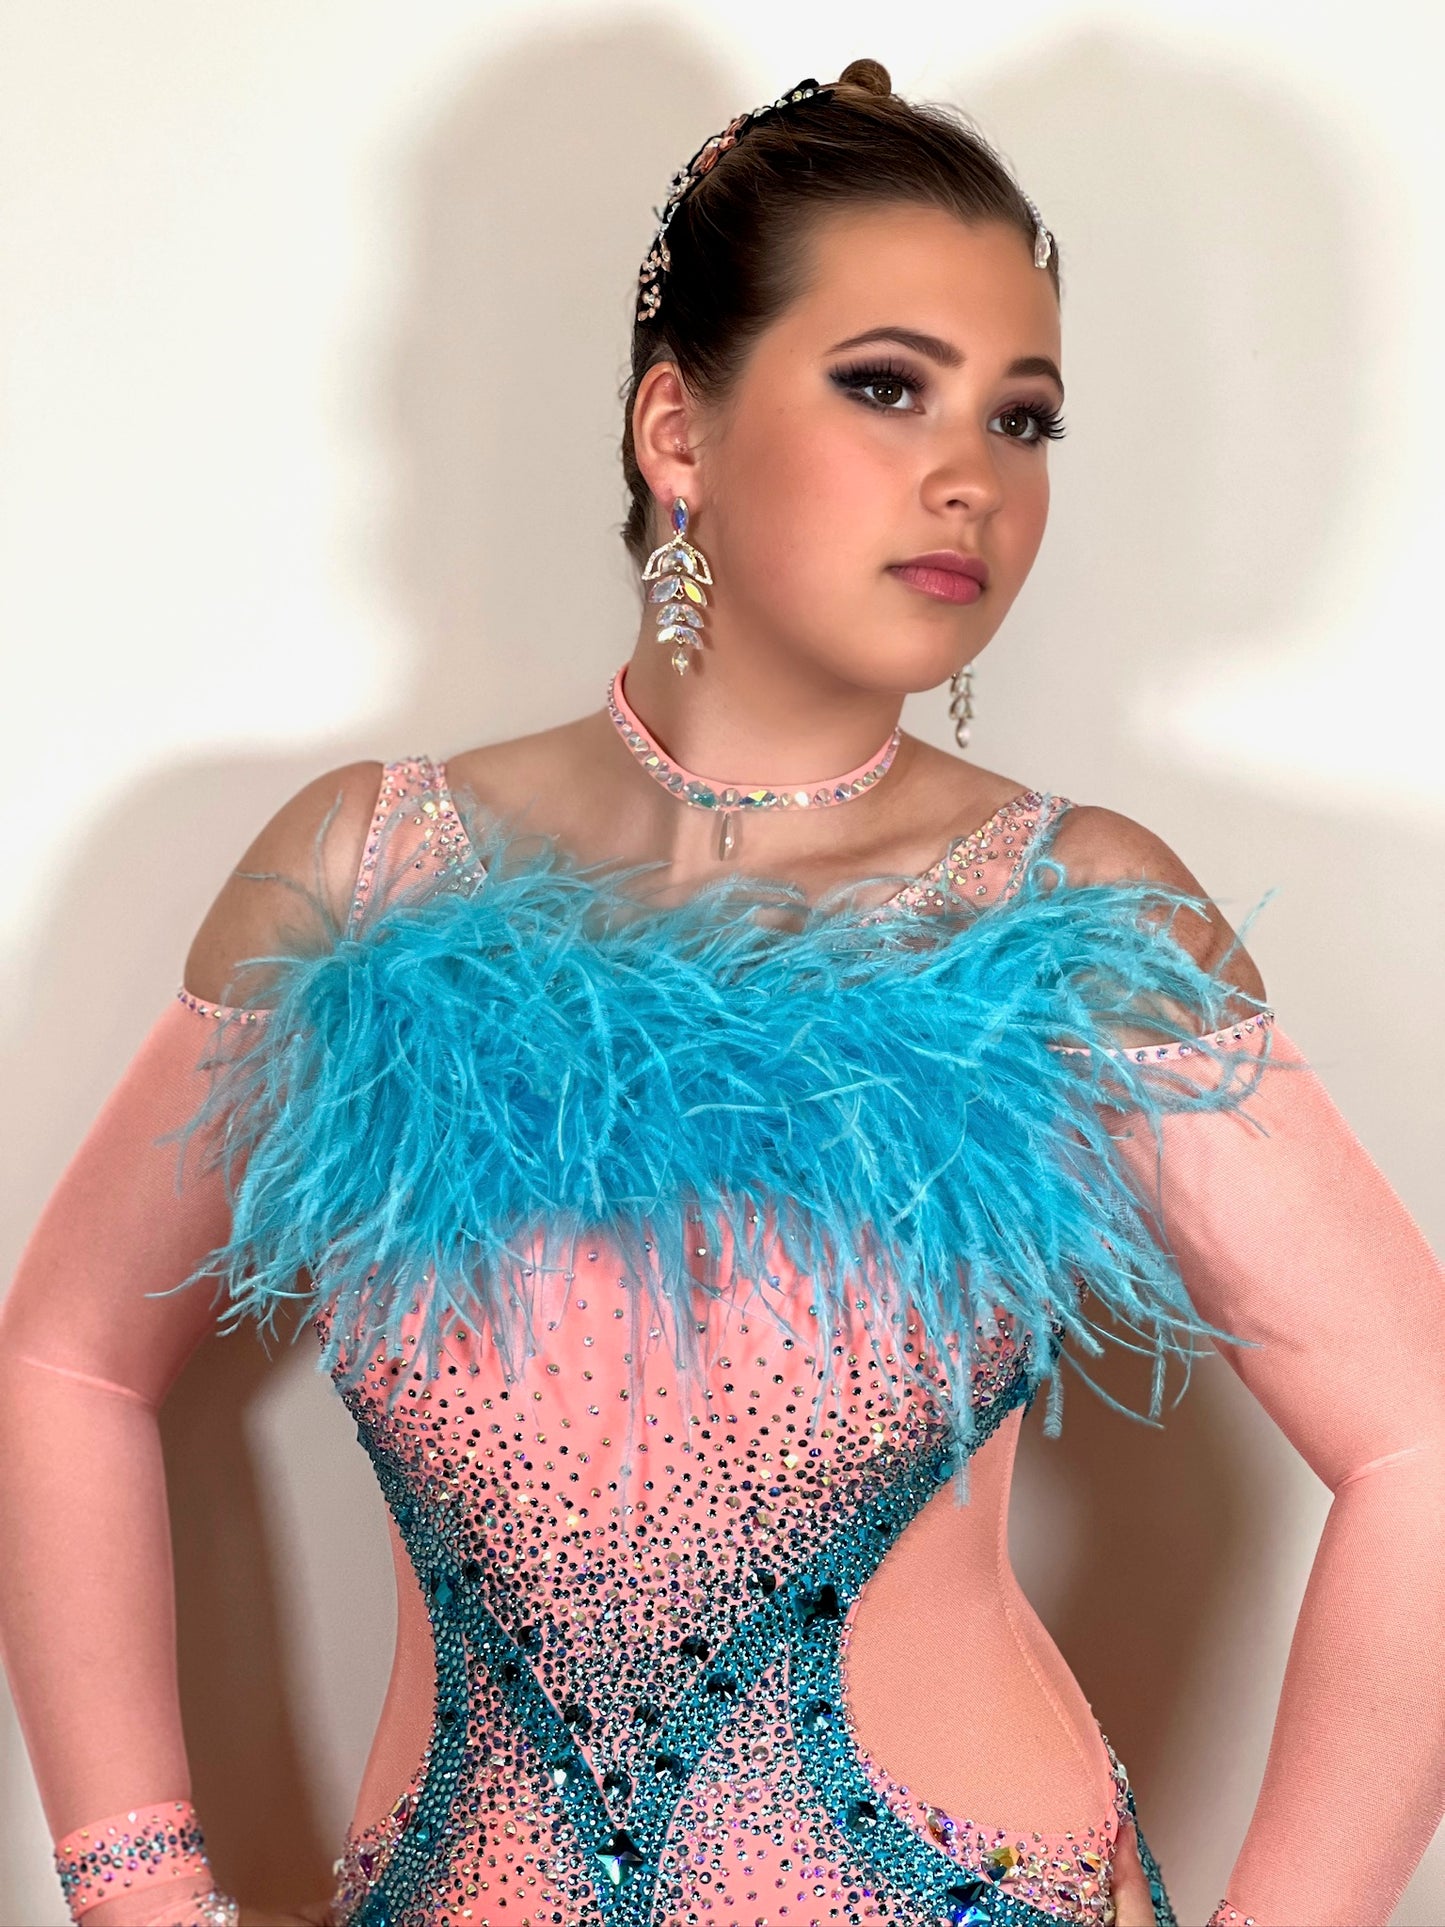 0111 Peach & Paradise Blue Competition Ballroom Dance Dress. Ostrich feather boa floats & detail to  the upper chest. Stunning stone decorations in paradise blue & AB